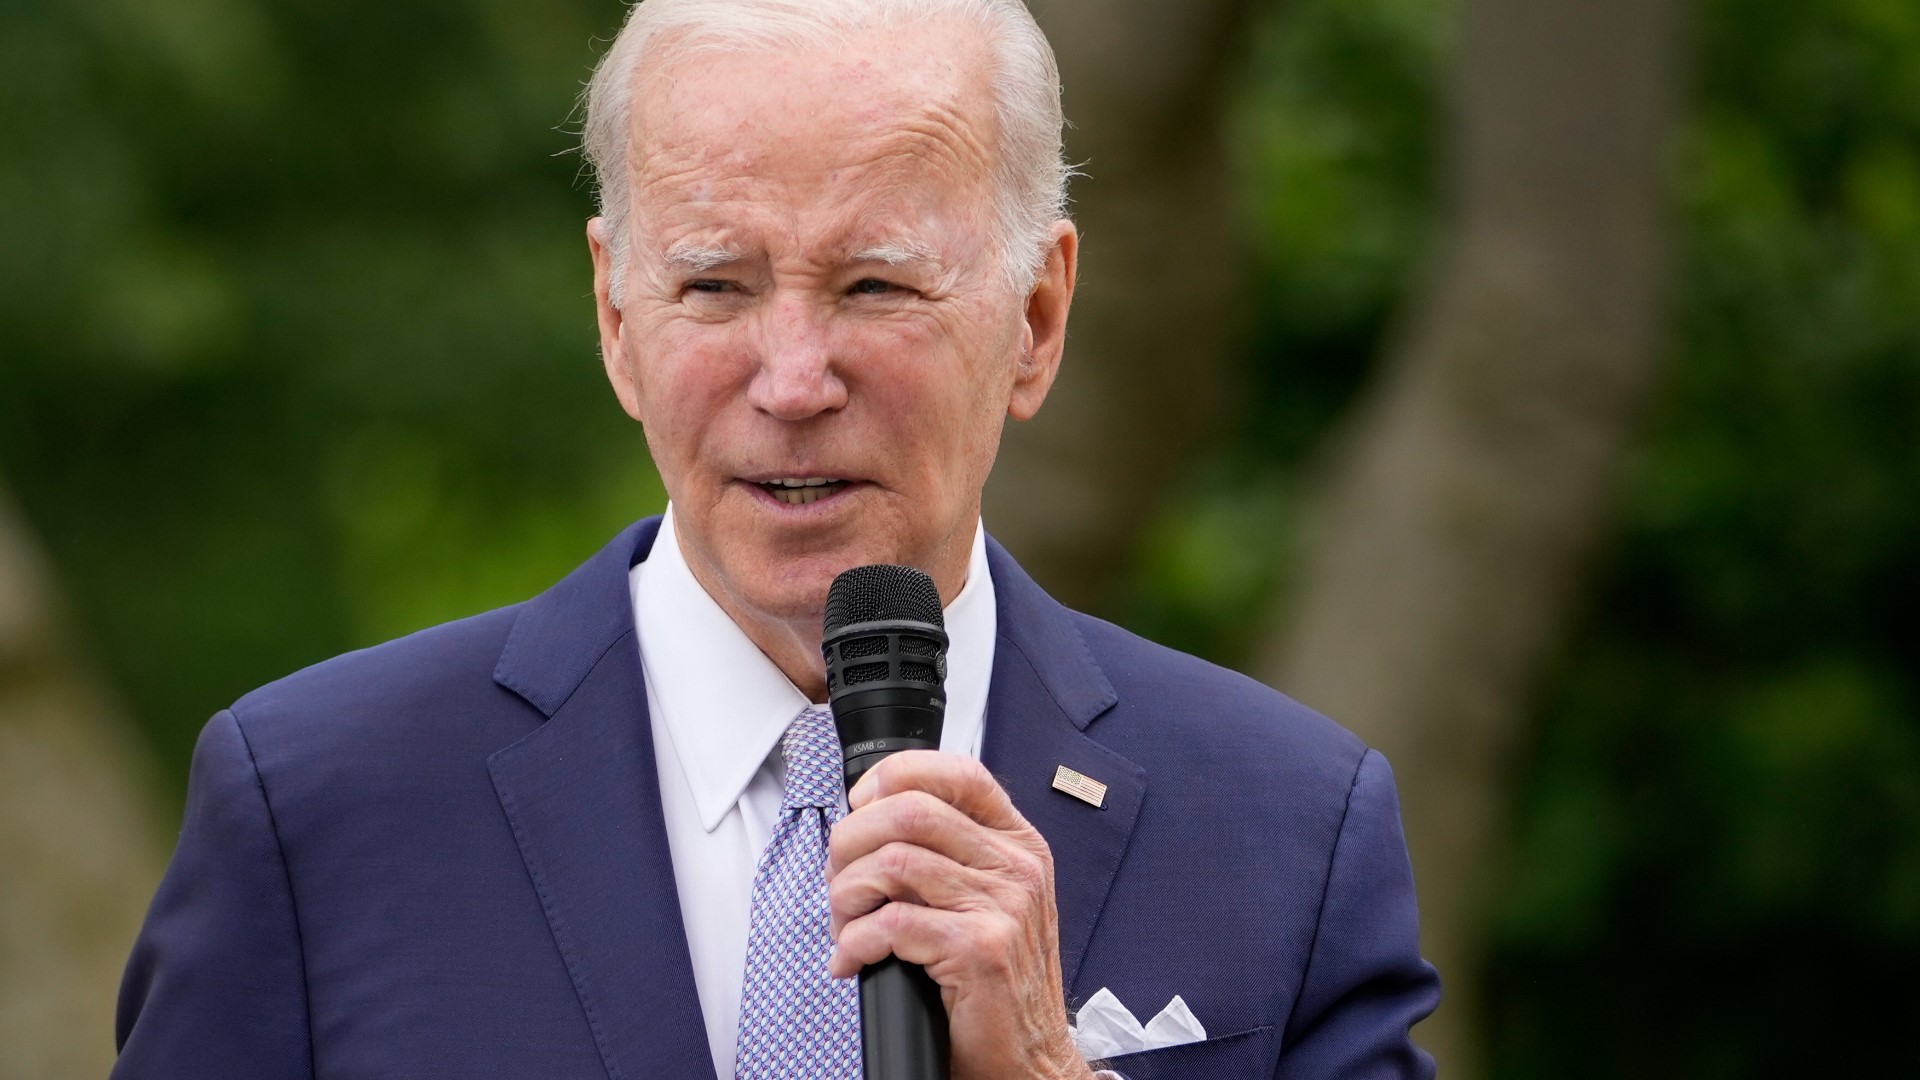 President Joe Biden and Texas Gov. Greg Abbott released statements in the wake of the Allen Premium Outlets mall shooting Saturday.